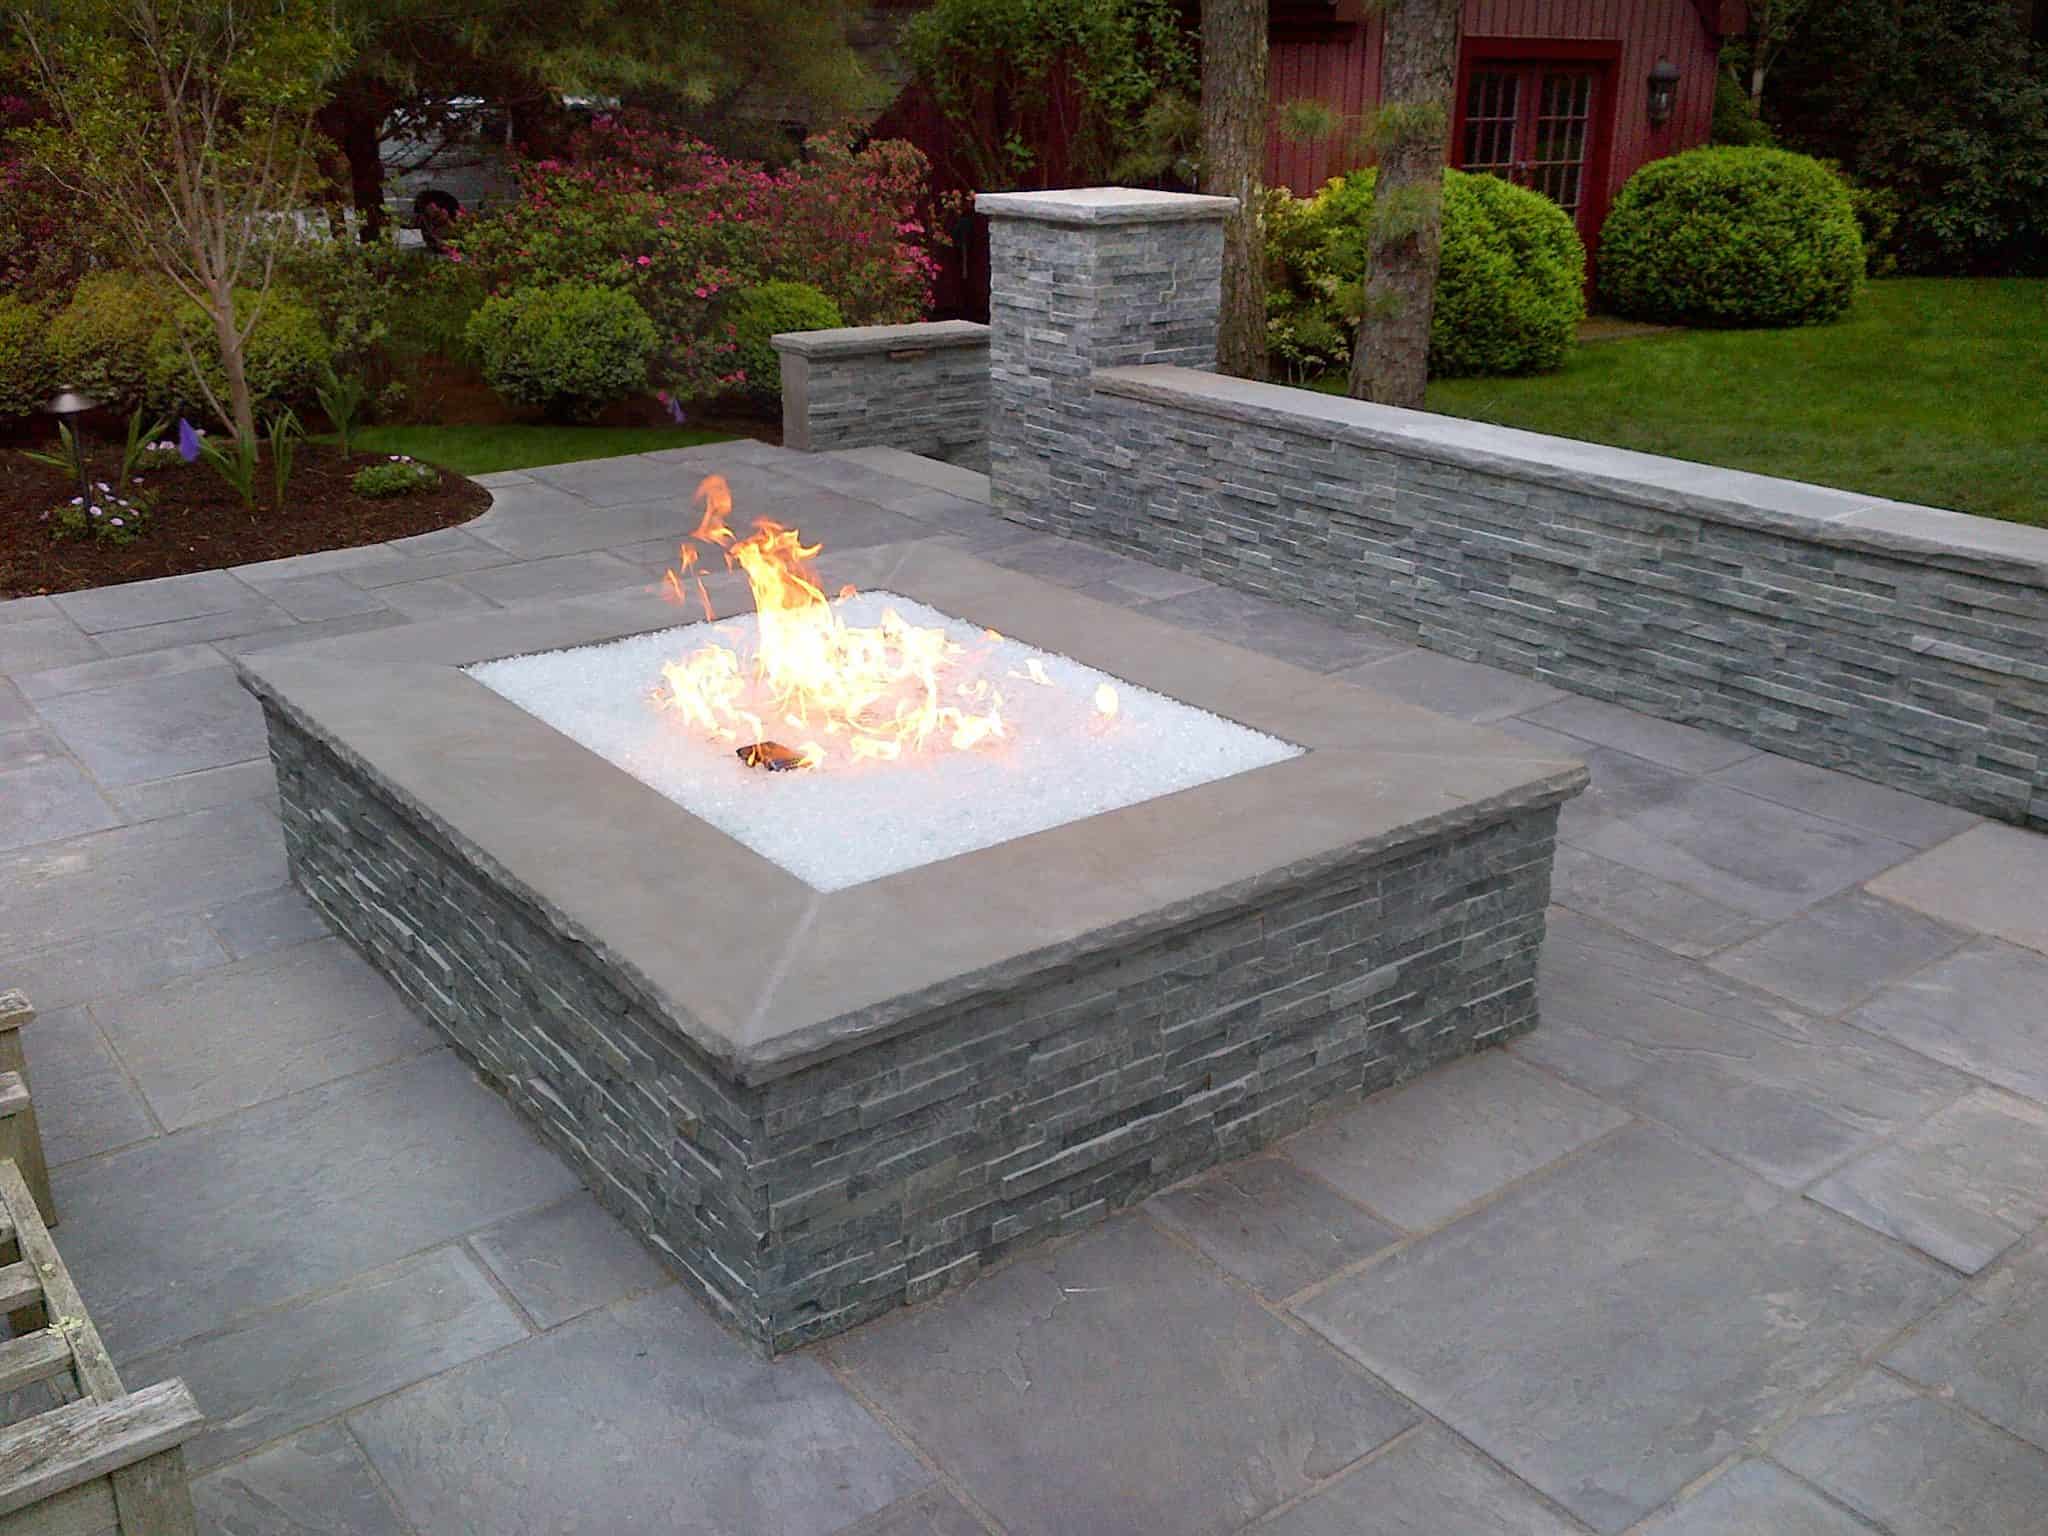 Over-Sized Gas Fire Pit With Fire Crystals